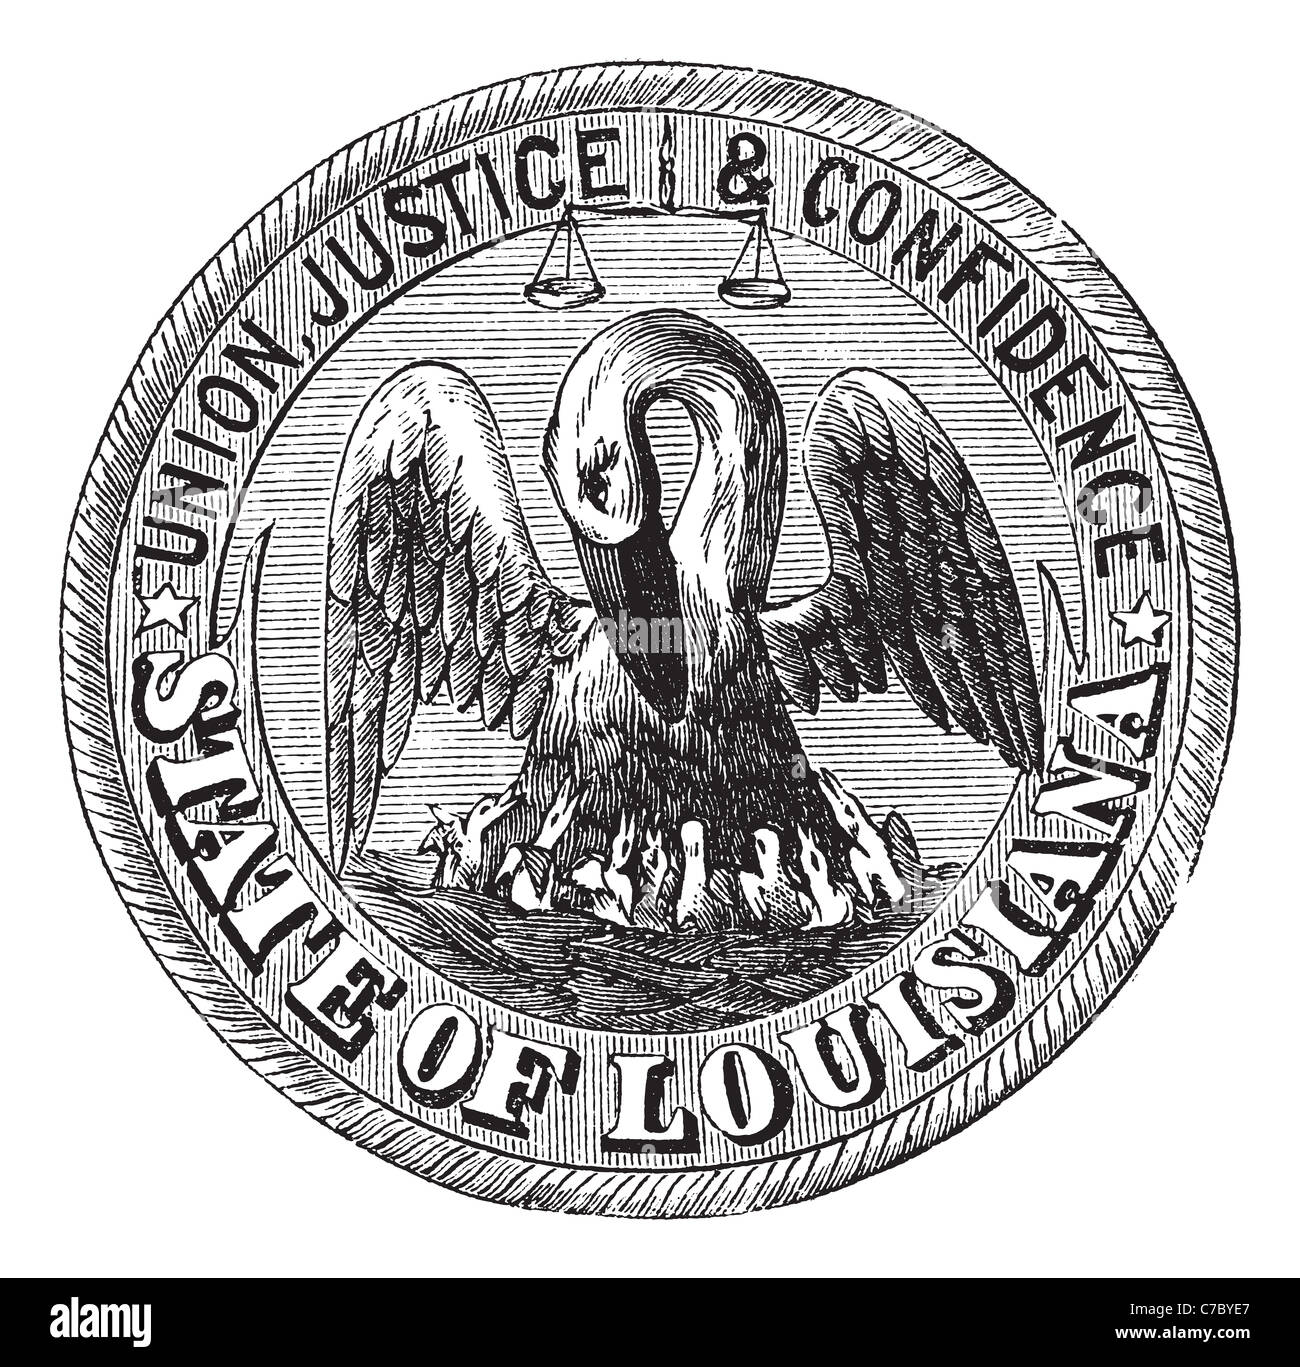 Great Seal of the State of Louisiana, USA, vintage engraving. Old engraved illustration of Great Seal of the State of Louisiana Stock Photo